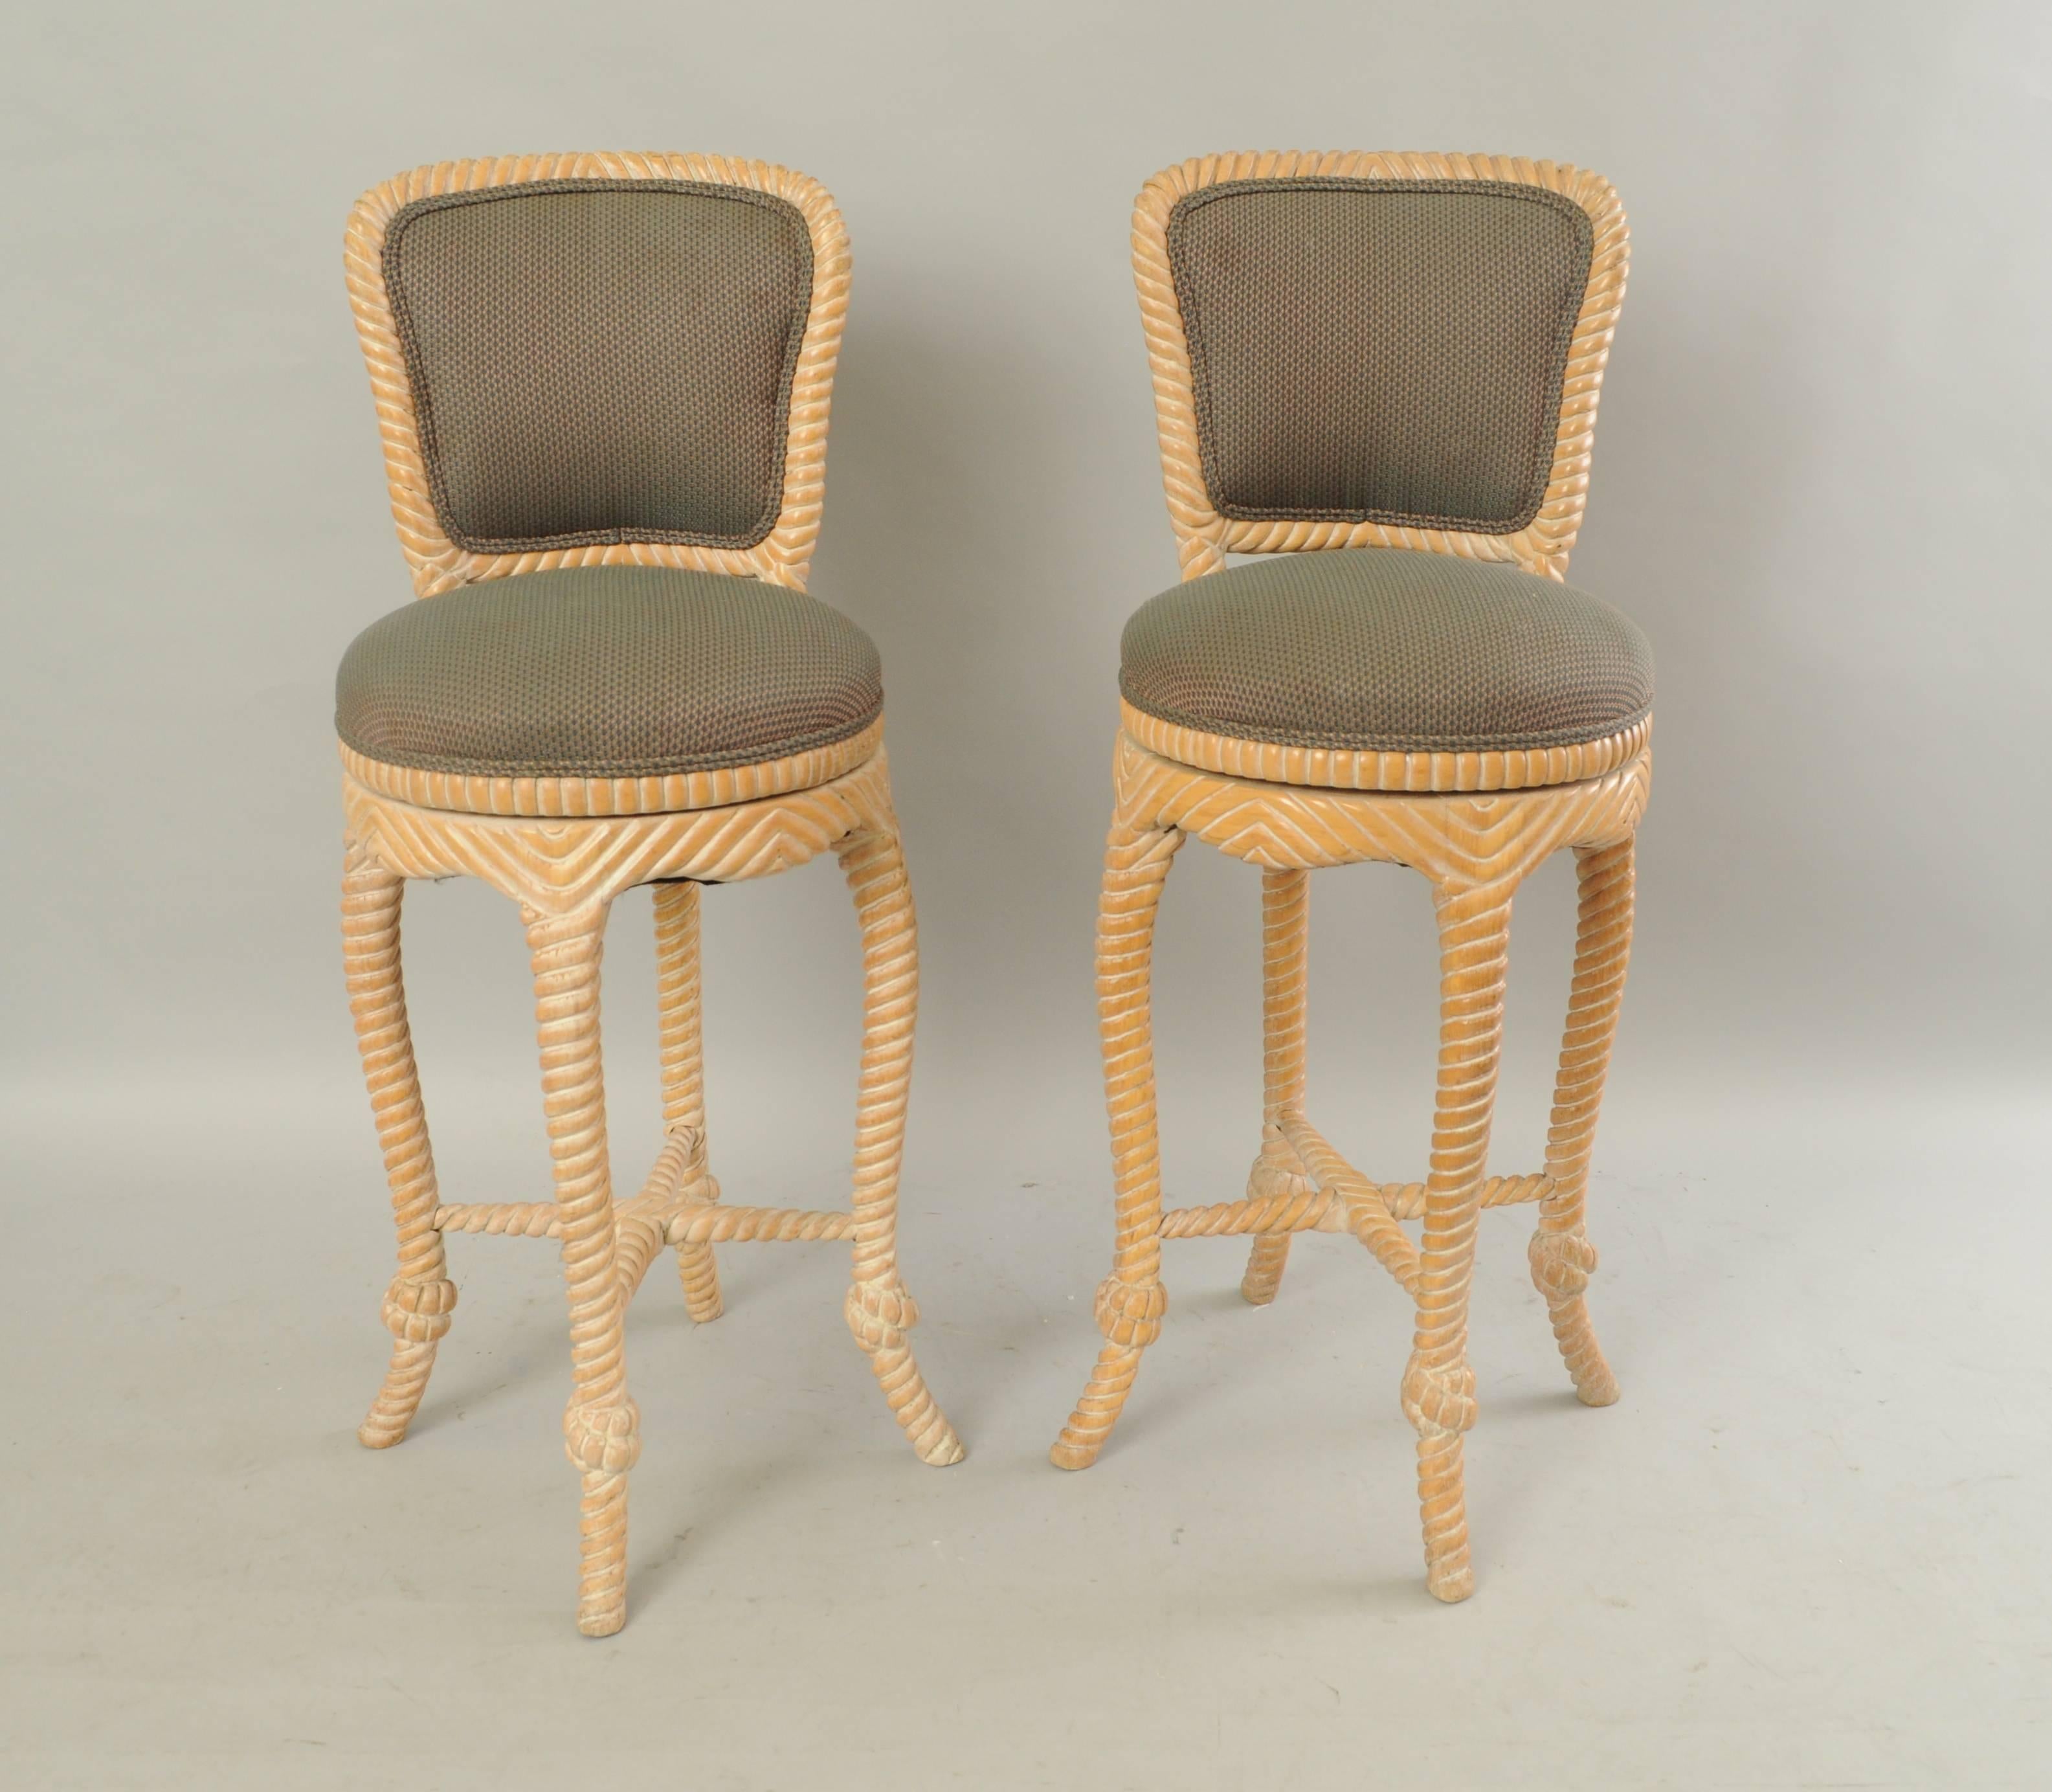 Pair of Vintage Italian Carved Wood Rope and Tassel Swivel Bar Stools Chairs For Sale 1